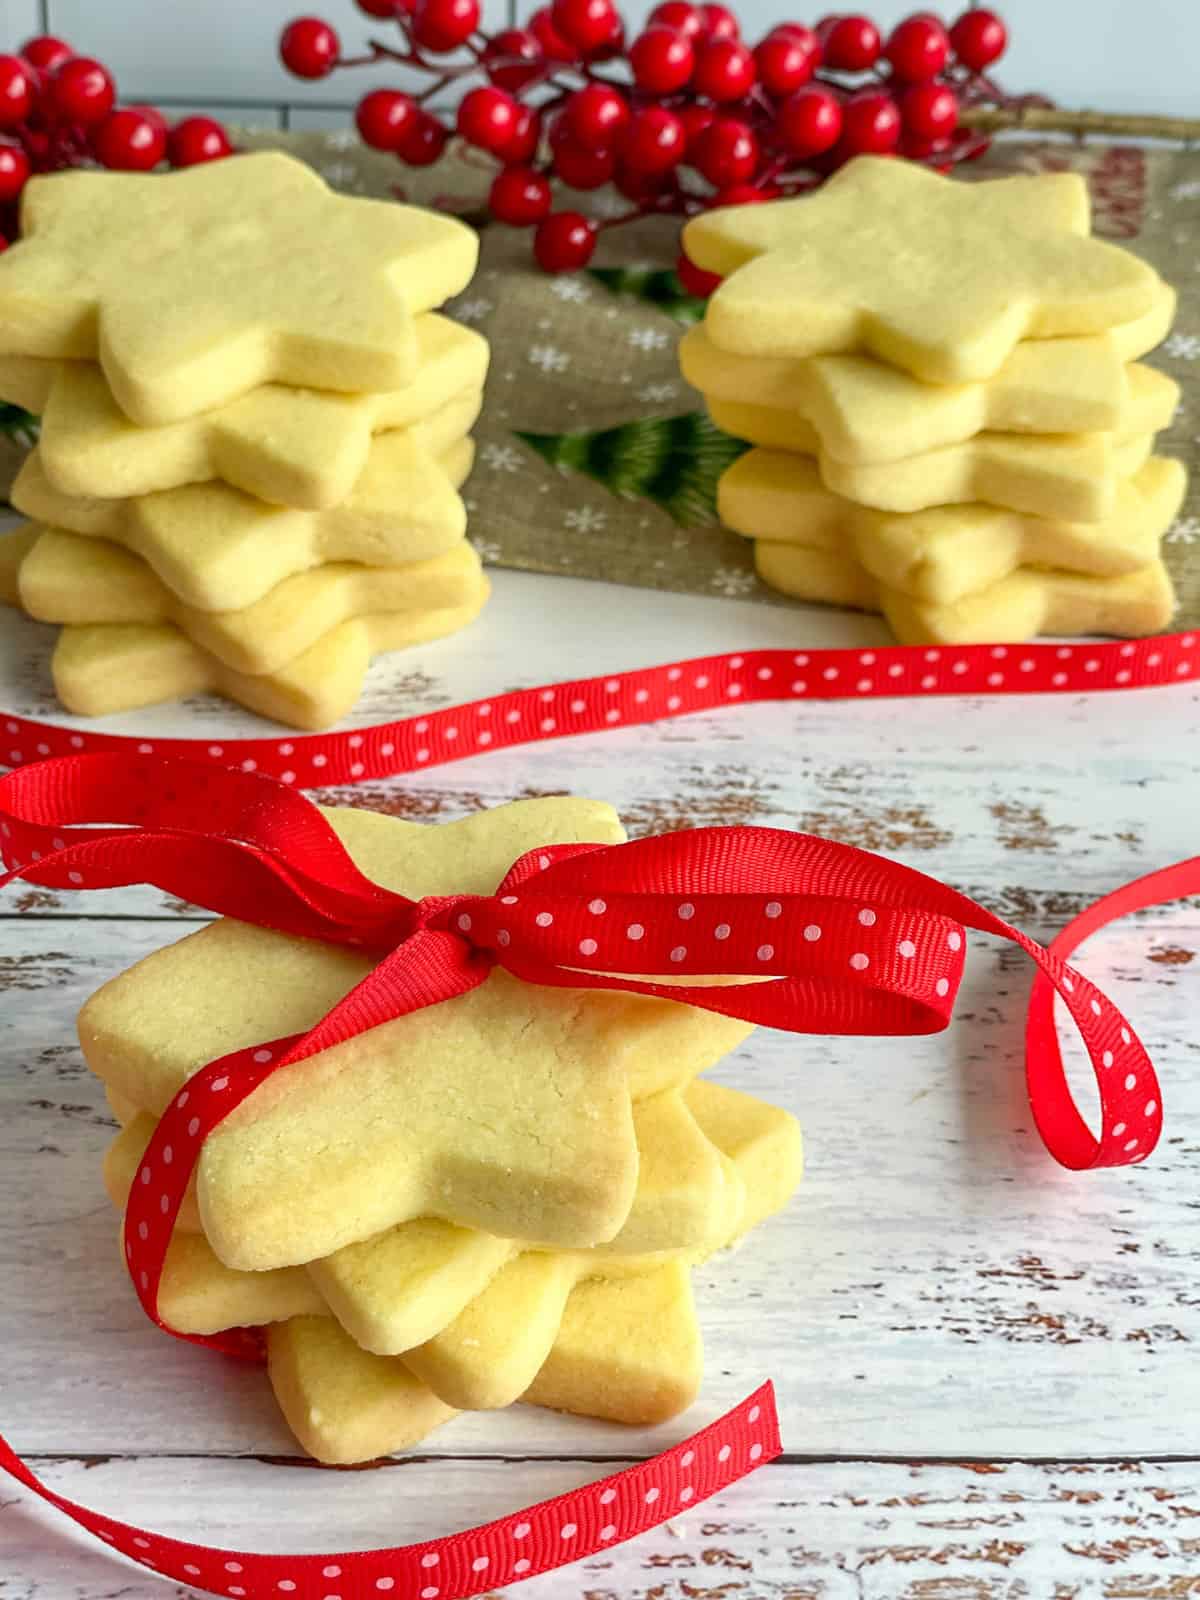 Traditional moulded shortbread – using my Mum's shortbread mould.